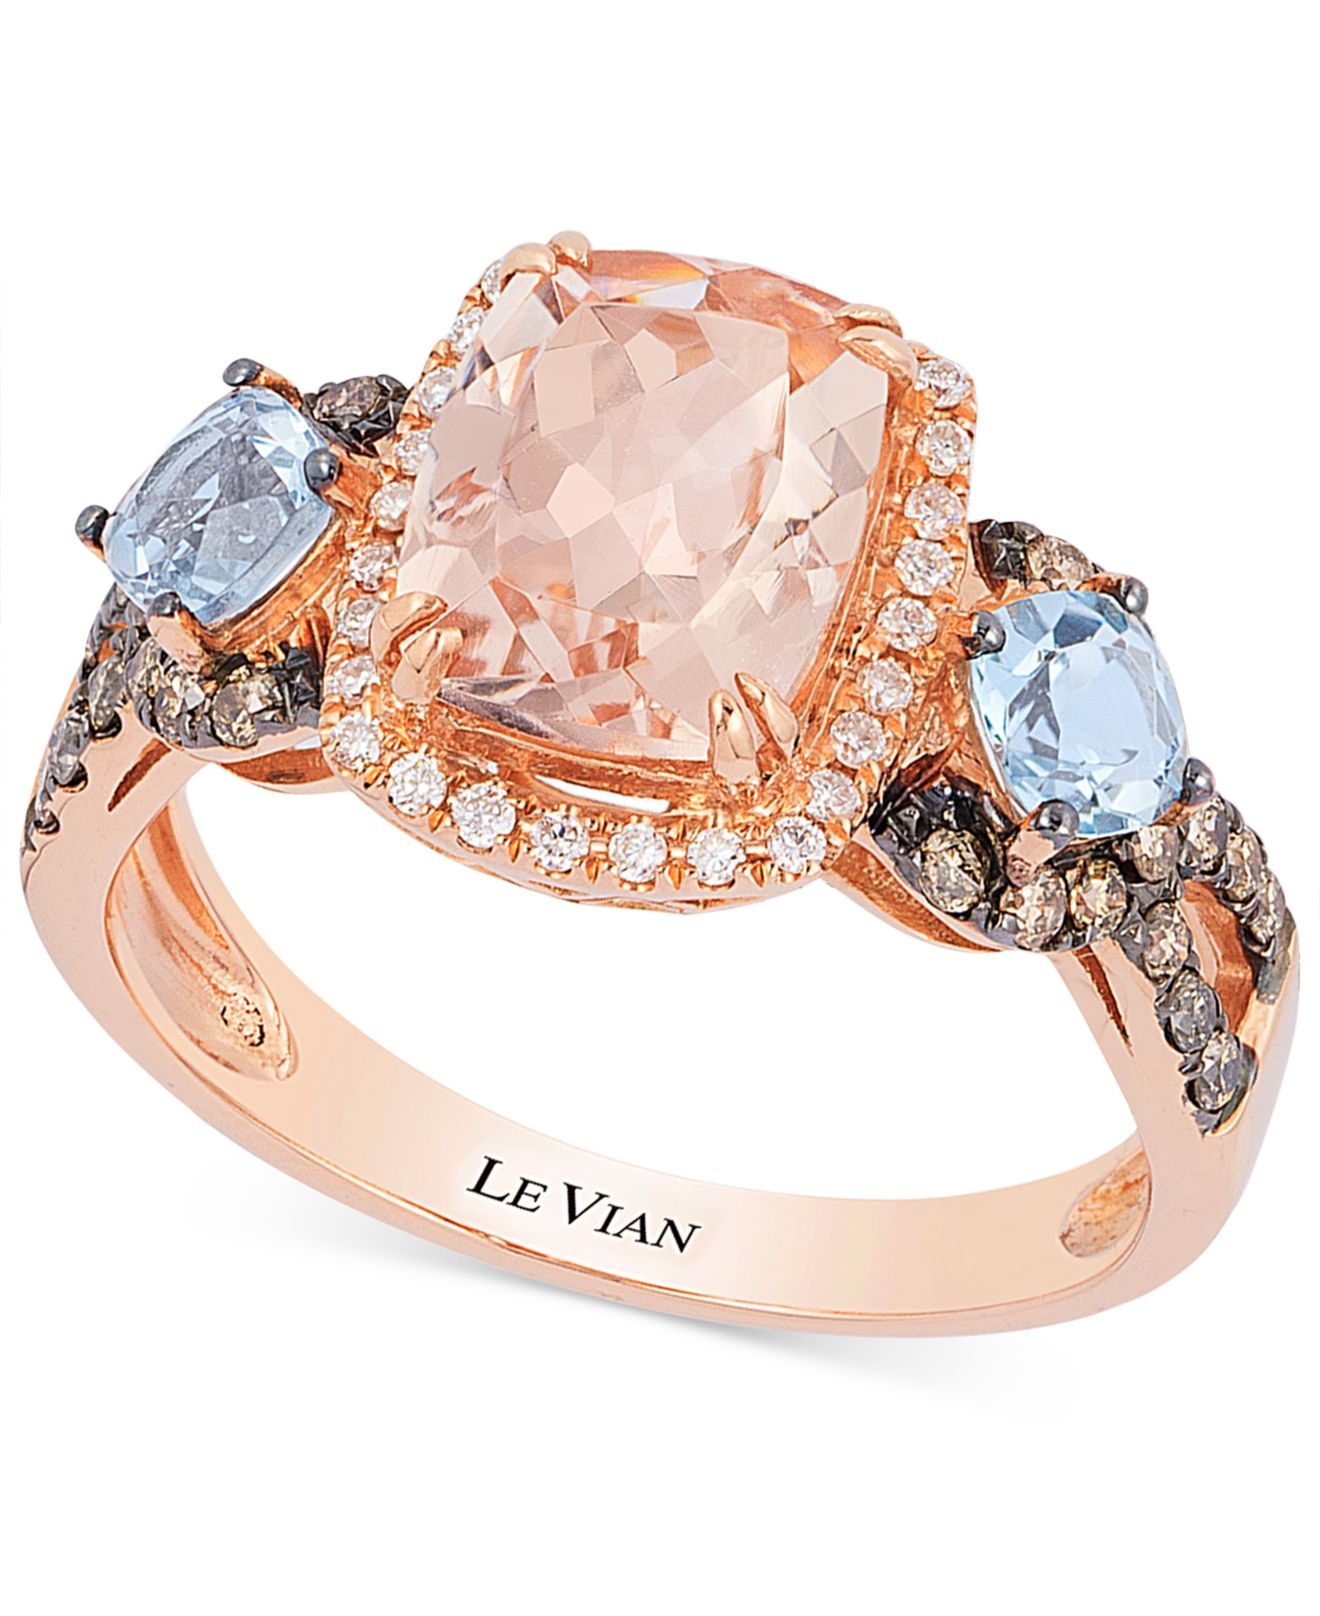 Le Vian Blue Aquamarine And Morganite 2 Ct Tw And Diamond 13 Ct Tw Ring In 14k Rose Gold Product 1 27298328 0 594529724 Normal 